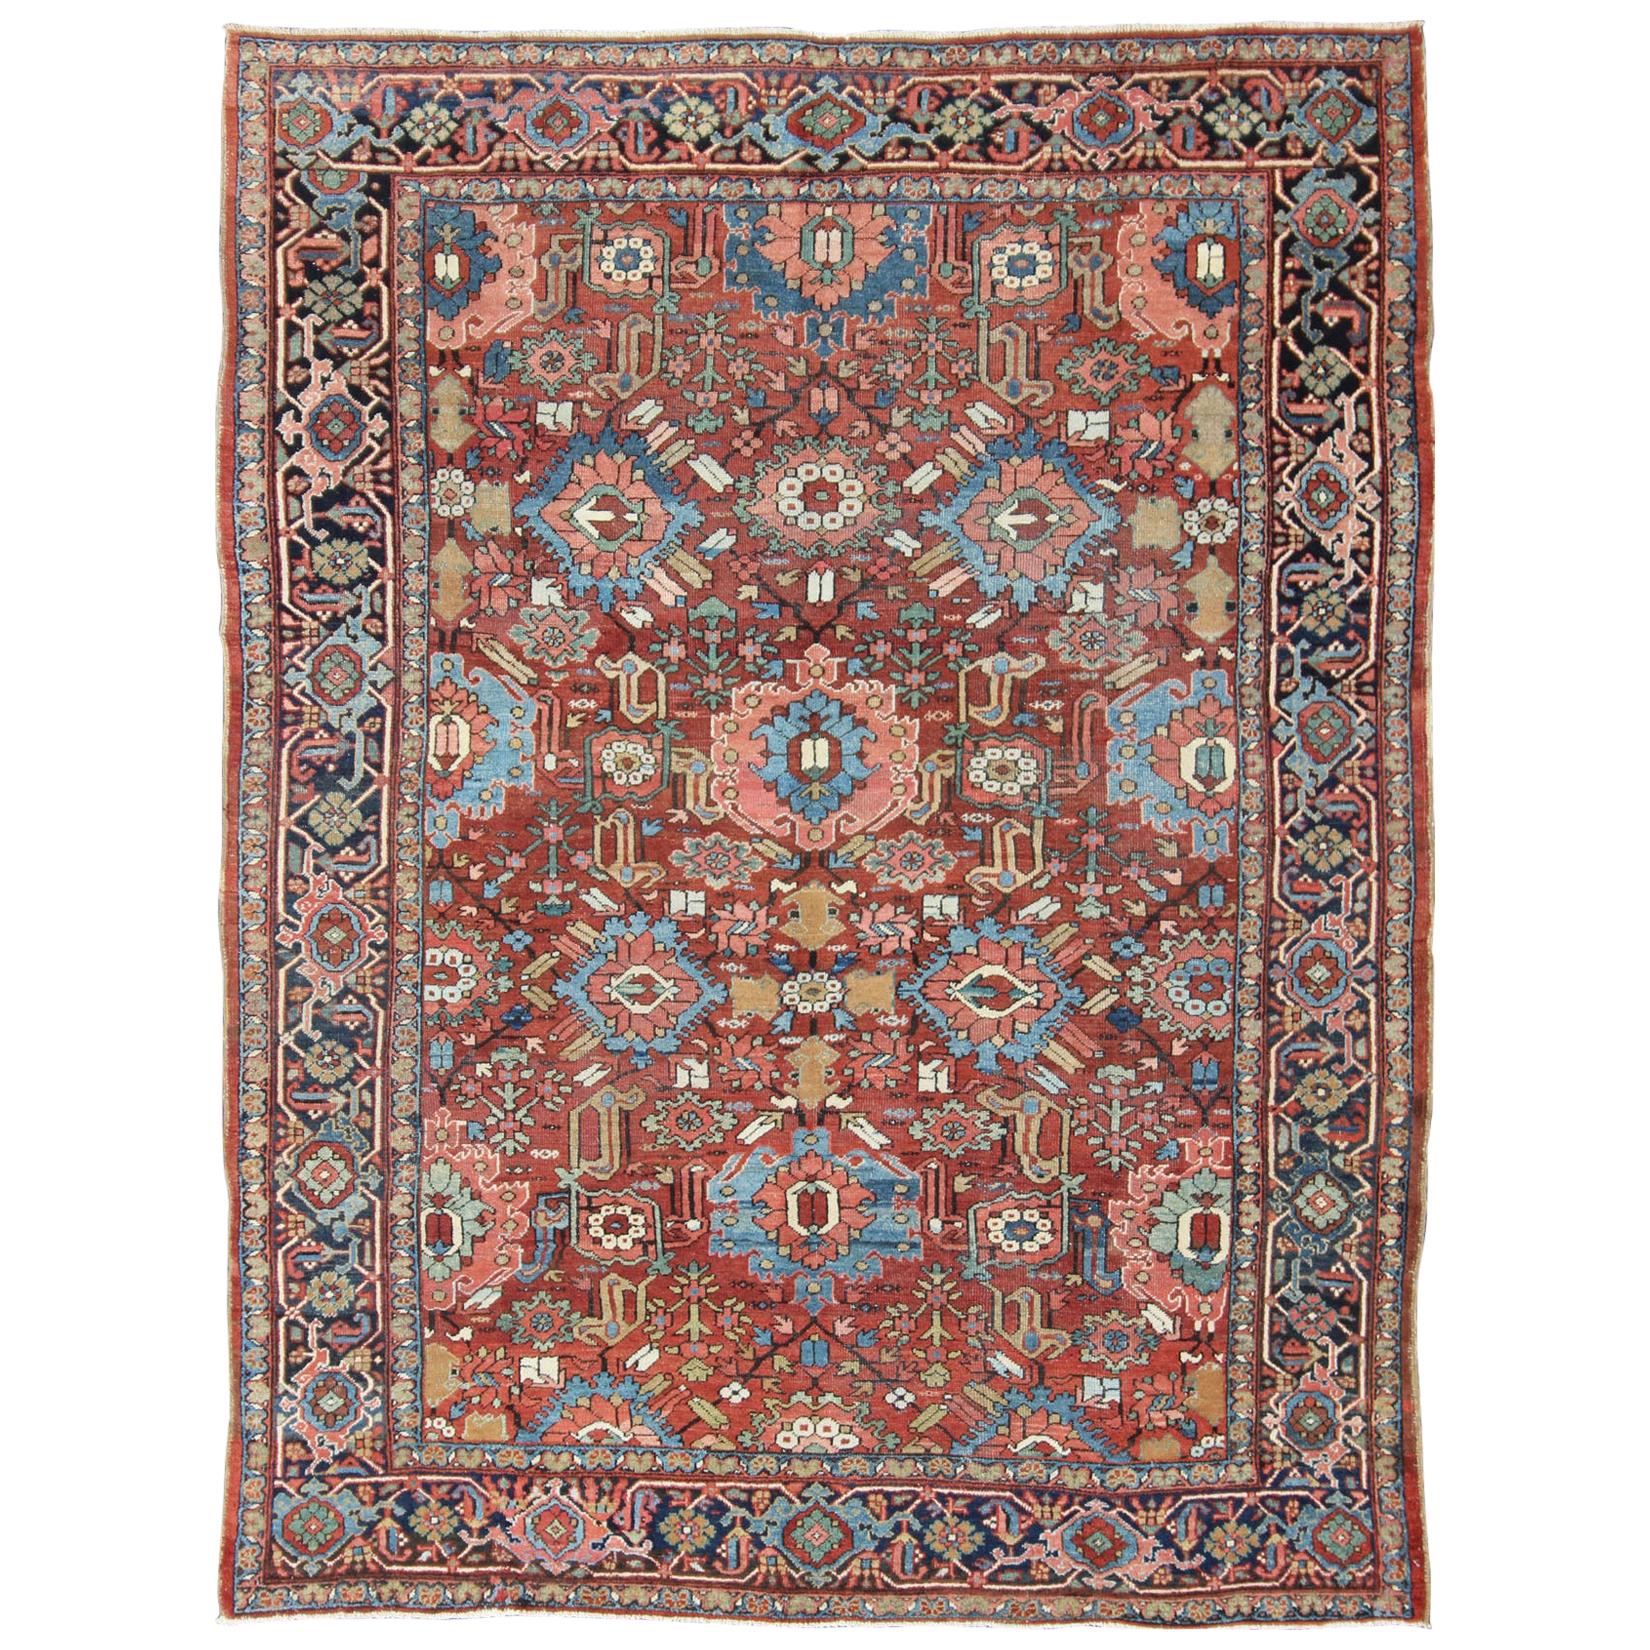 Antique Persian All-Over Serapi-Heriz Rug with All-Over Geometric Design